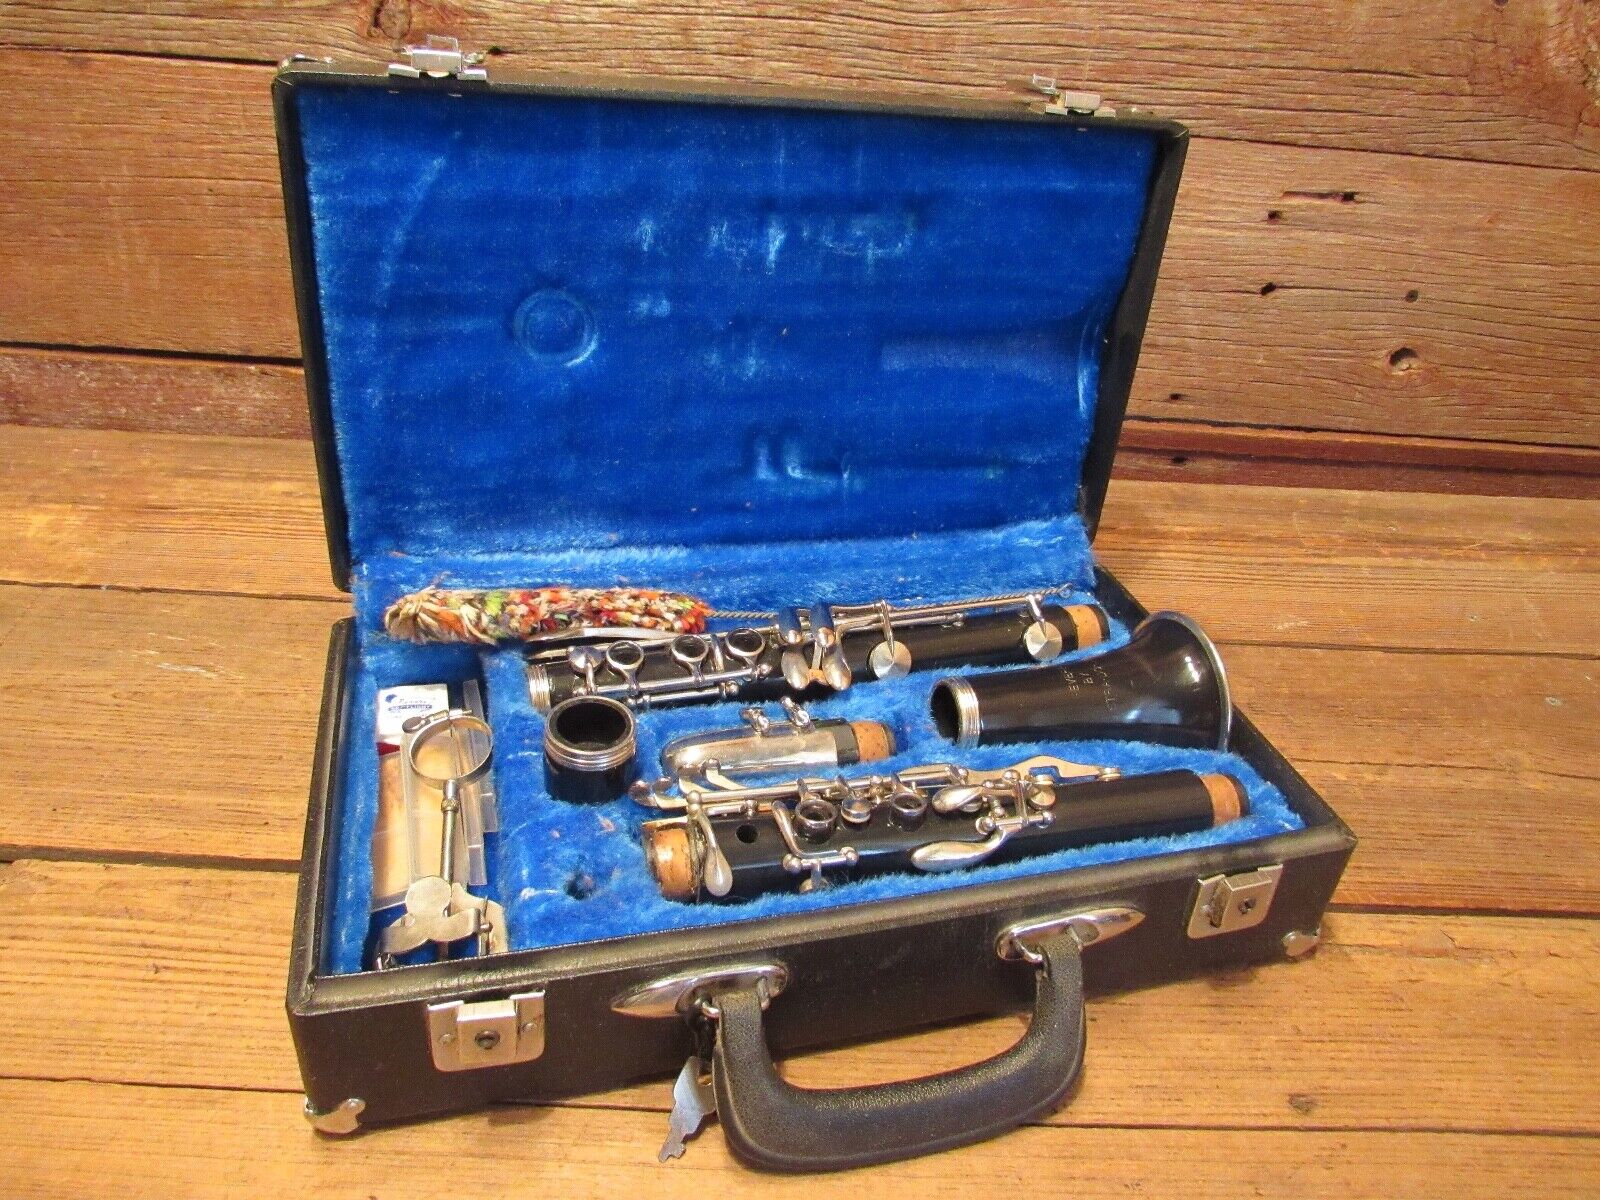 Vintage REVERE Clarinet By STRA-DO-LIN With Mouthpiece & Original Case And Key! 100% nieuw, origineel!